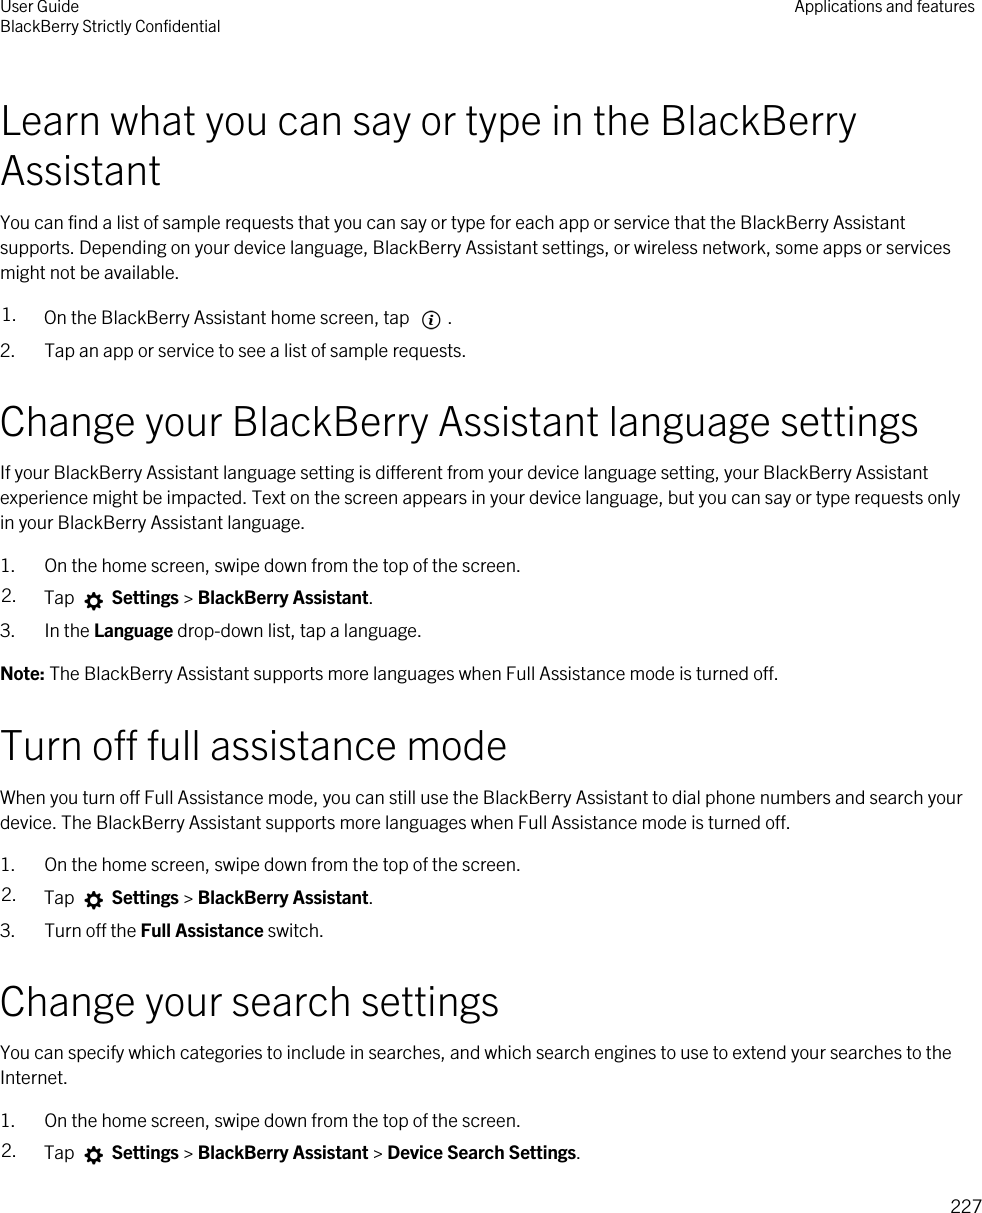 Learn what you can say or type in the BlackBerry AssistantYou can find a list of sample requests that you can say or type for each app or service that the BlackBerry Assistant supports. Depending on your device language, BlackBerry Assistant settings, or wireless network, some apps or services might not be available.1. On the BlackBerry Assistant home screen, tap  . 2. Tap an app or service to see a list of sample requests.Change your BlackBerry Assistant language settingsIf your BlackBerry Assistant language setting is different from your device language setting, your BlackBerry Assistant experience might be impacted. Text on the screen appears in your device language, but you can say or type requests only in your BlackBerry Assistant language.1. On the home screen, swipe down from the top of the screen.2. Tap   Settings &gt; BlackBerry Assistant.3. In the Language drop-down list, tap a language.Note: The BlackBerry Assistant supports more languages when Full Assistance mode is turned off.Turn off full assistance modeWhen you turn off Full Assistance mode, you can still use the BlackBerry Assistant to dial phone numbers and search your device. The BlackBerry Assistant supports more languages when Full Assistance mode is turned off.1. On the home screen, swipe down from the top of the screen.2. Tap   Settings &gt; BlackBerry Assistant.3. Turn off the Full Assistance switch.Change your search settingsYou can specify which categories to include in searches, and which search engines to use to extend your searches to the Internet.1. On the home screen, swipe down from the top of the screen.2. Tap   Settings &gt; BlackBerry Assistant &gt; Device Search Settings.User GuideBlackBerry Strictly Confidential Applications and features227